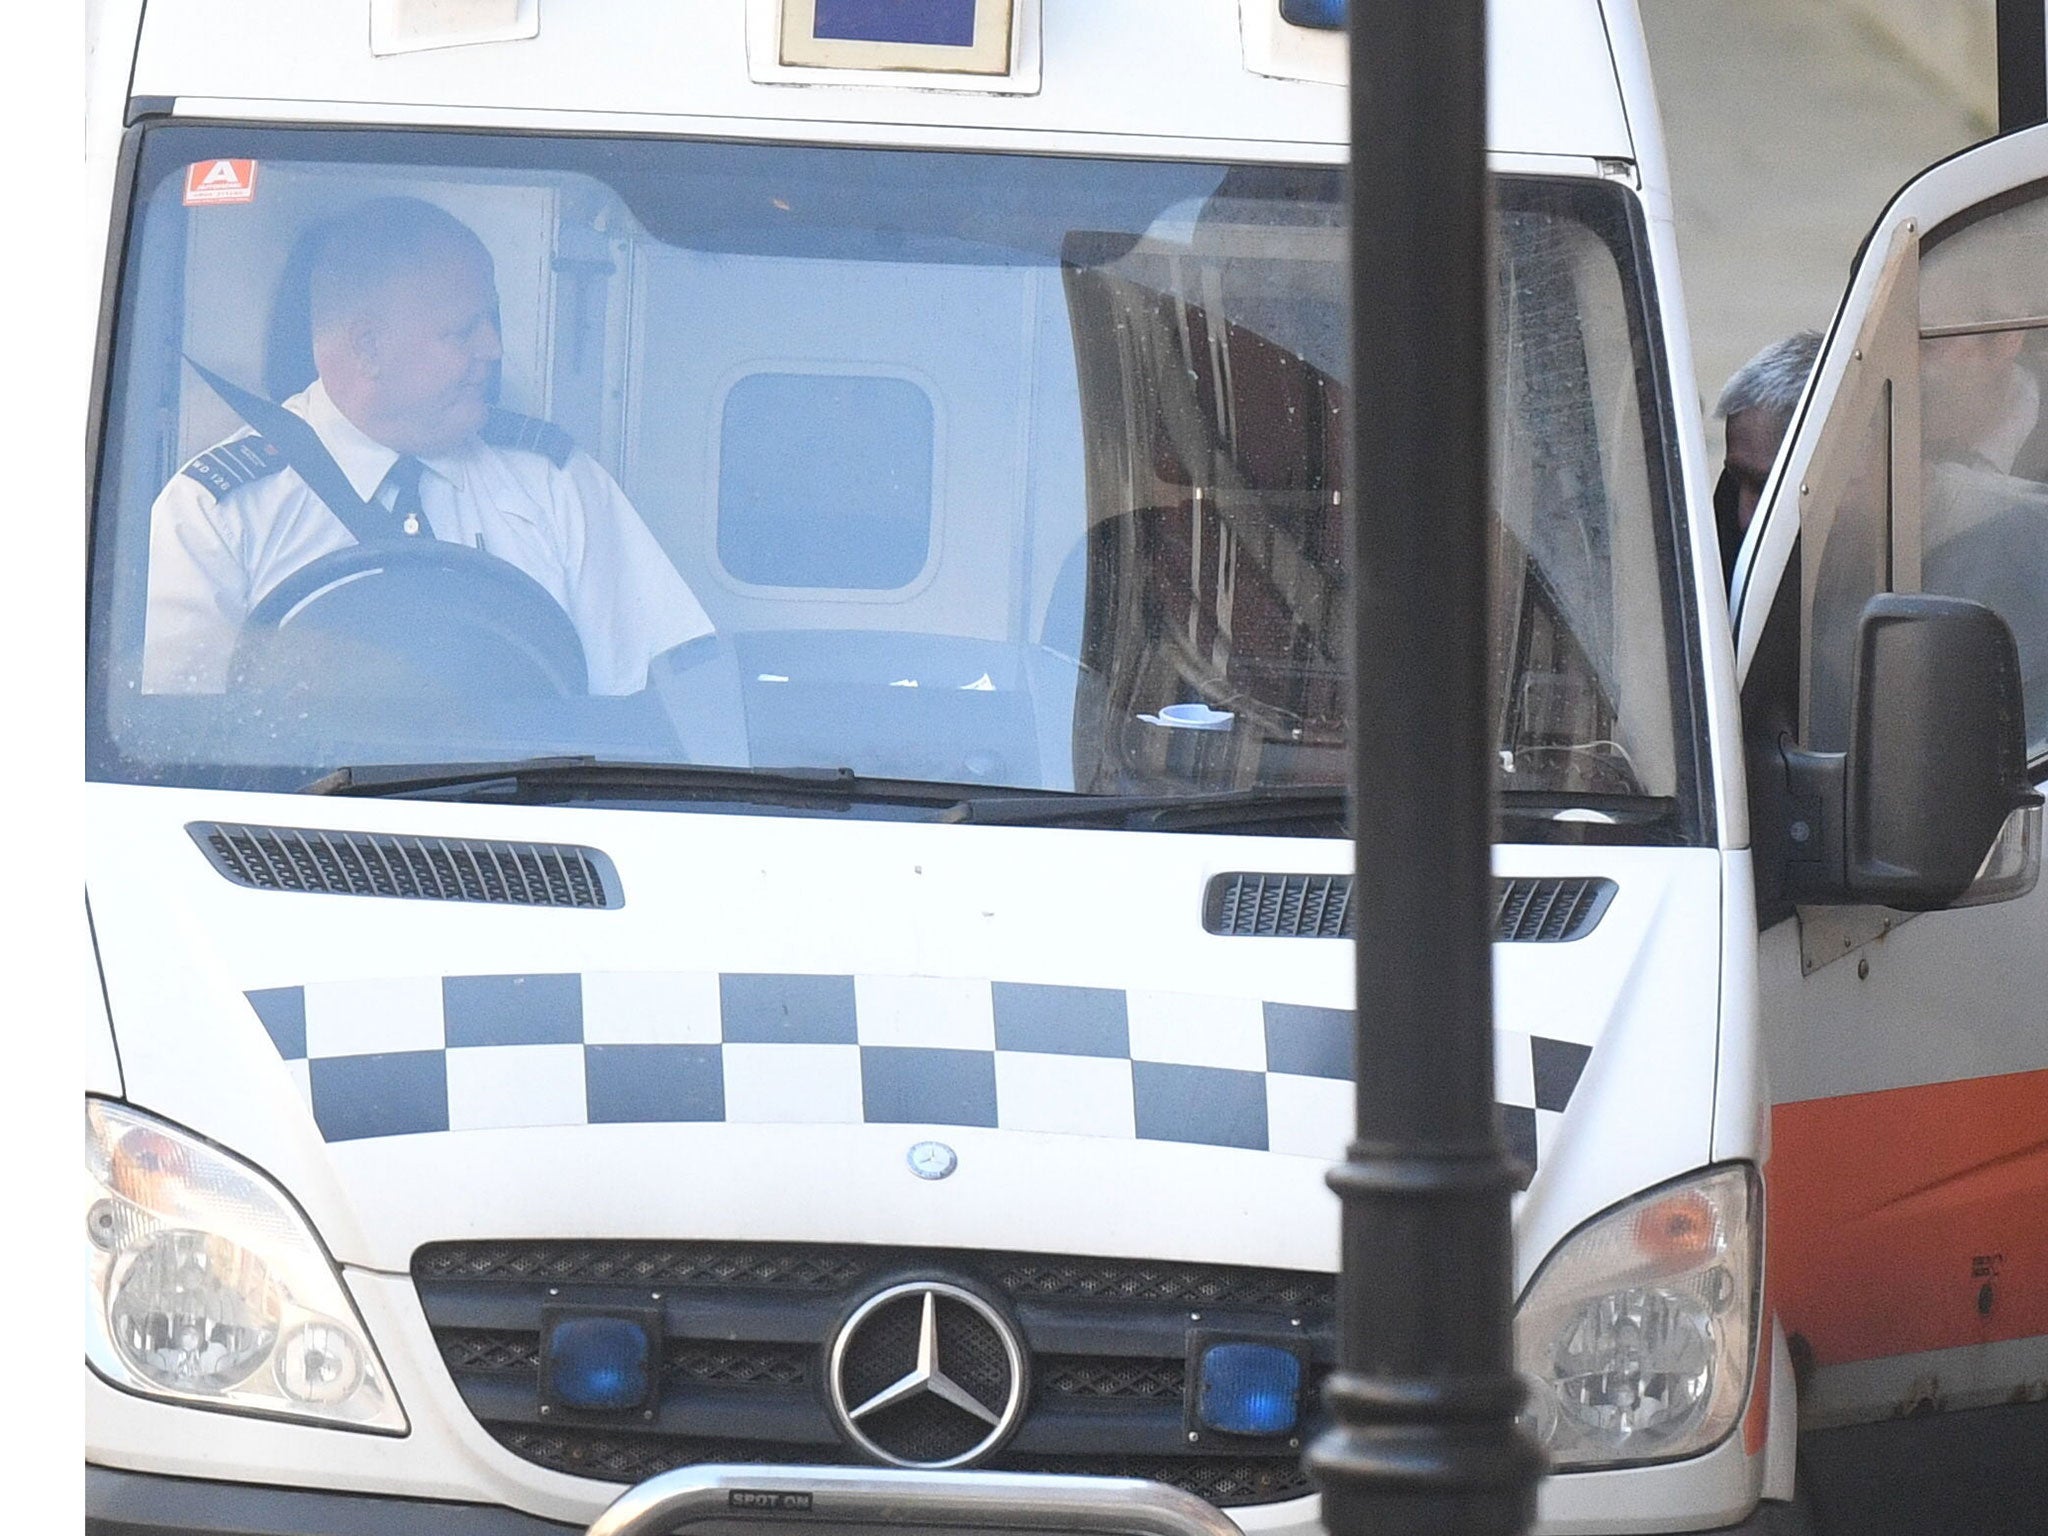 Black cab rapist John Worboys, is led into a prison van following an appearance at the High Court in London